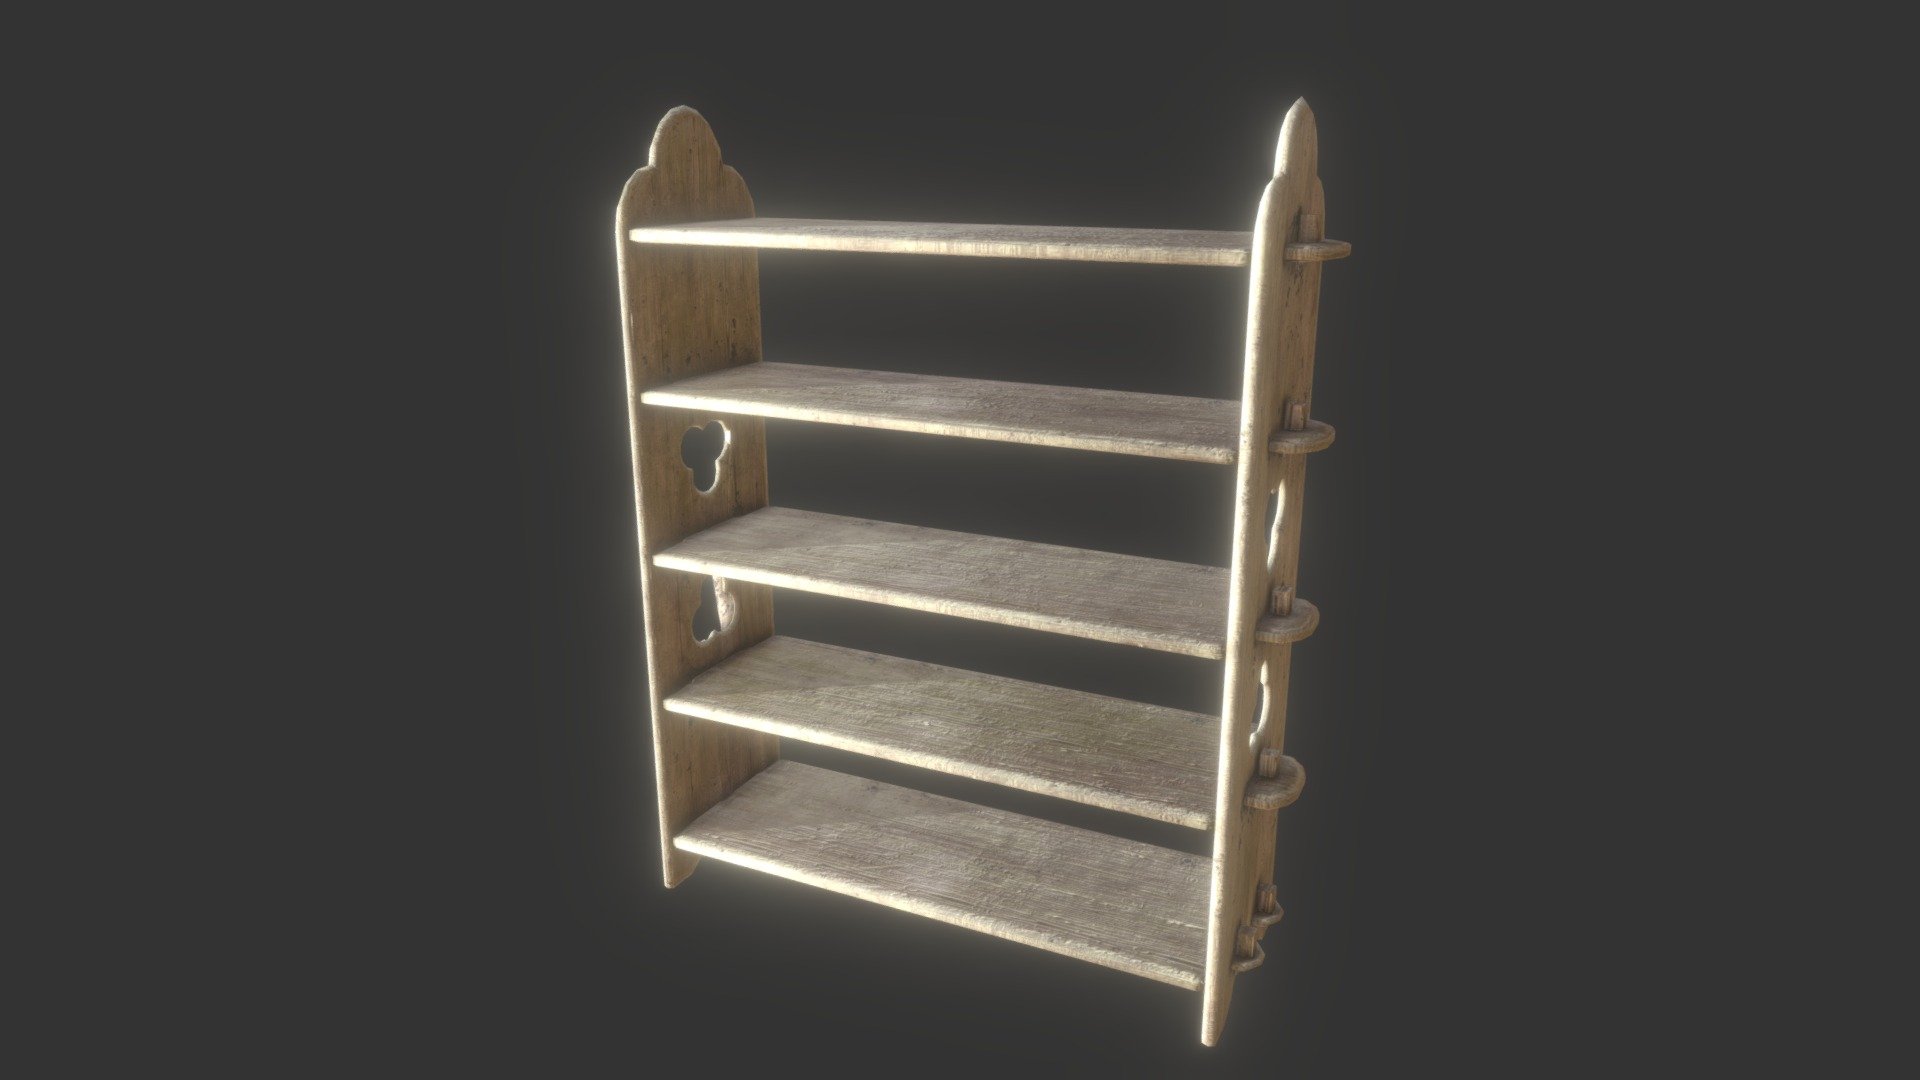 A basic carved wood shelf using traditional medieval motifs and design 3d model